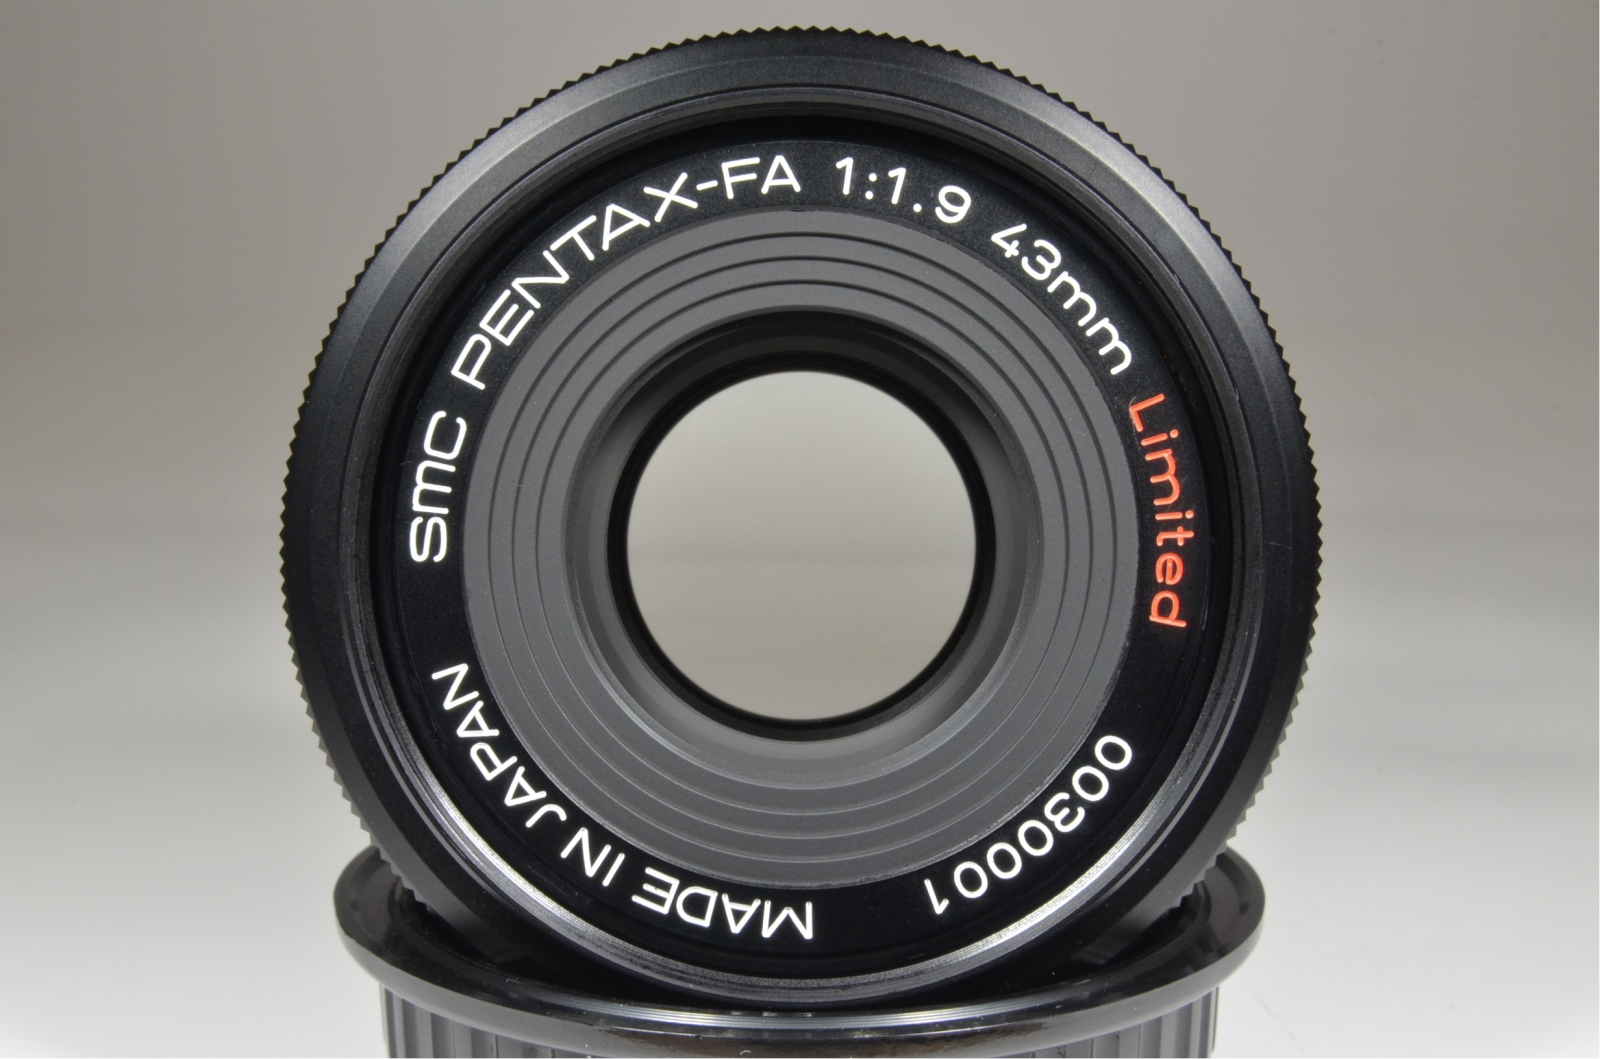 PENTAX SMC FA 43mm F1.9 Black Limited Lens Made in JAPAN #a0793